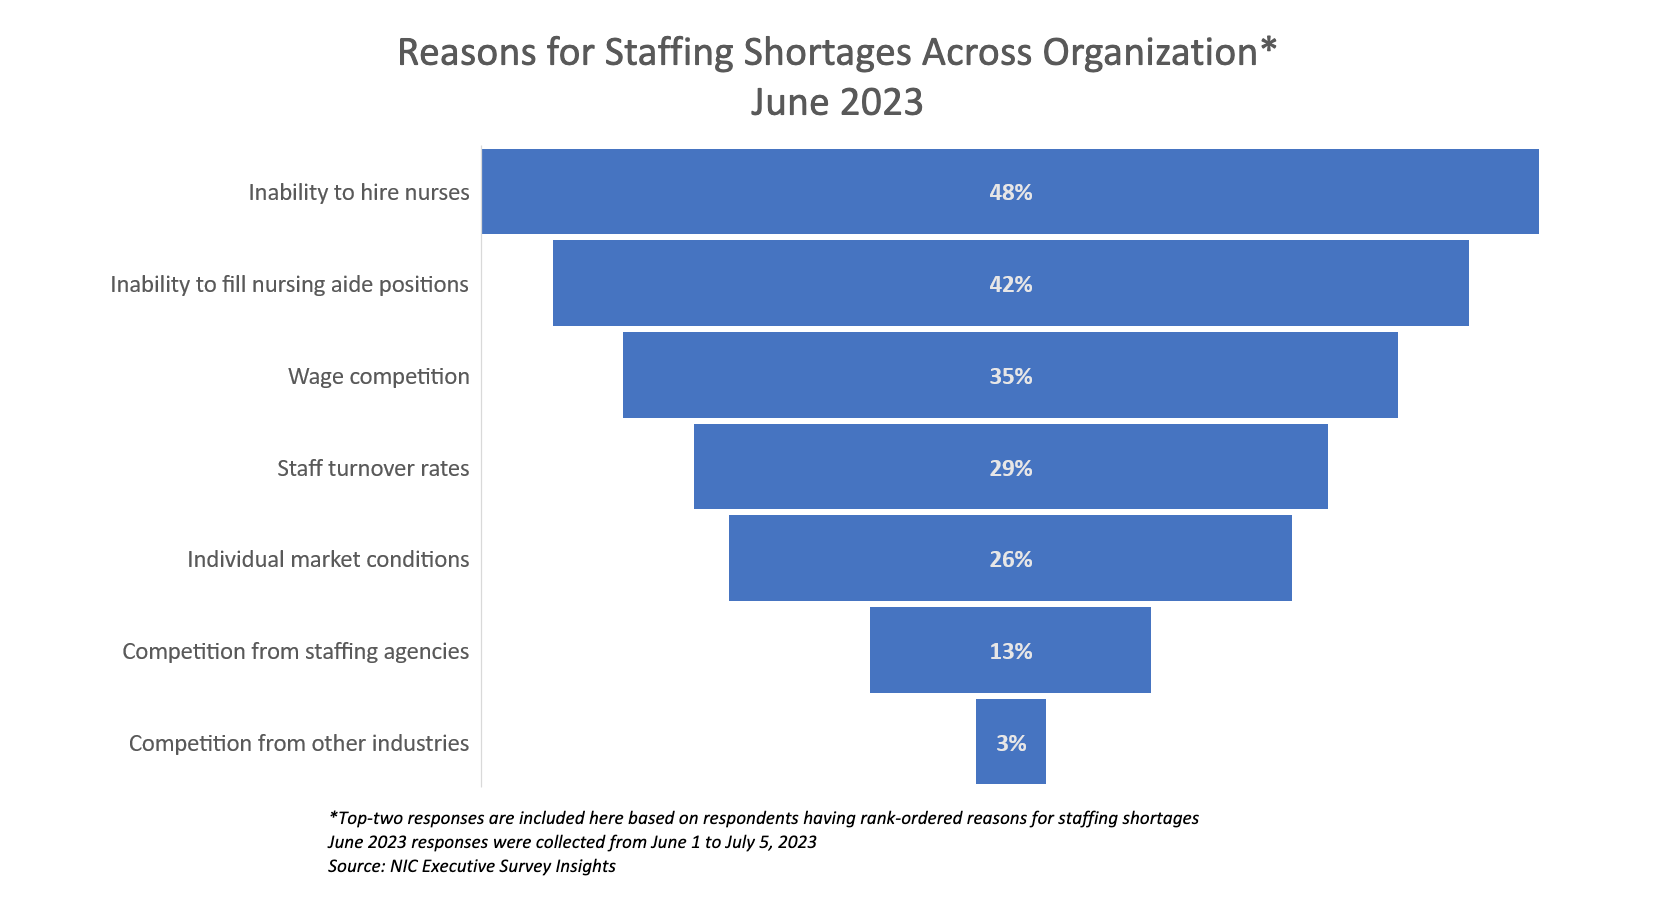 Reason for Staffing Shortage, ranked at number 1 with 48% of respondents claiming 'inability to hire nurses, with 42% 'inability to fill nursing aide positions, 35% wage competition, 29% staff turnover rates, 26% individual market conditions, 13% competition from staffing agencies, 3% competition from other industries